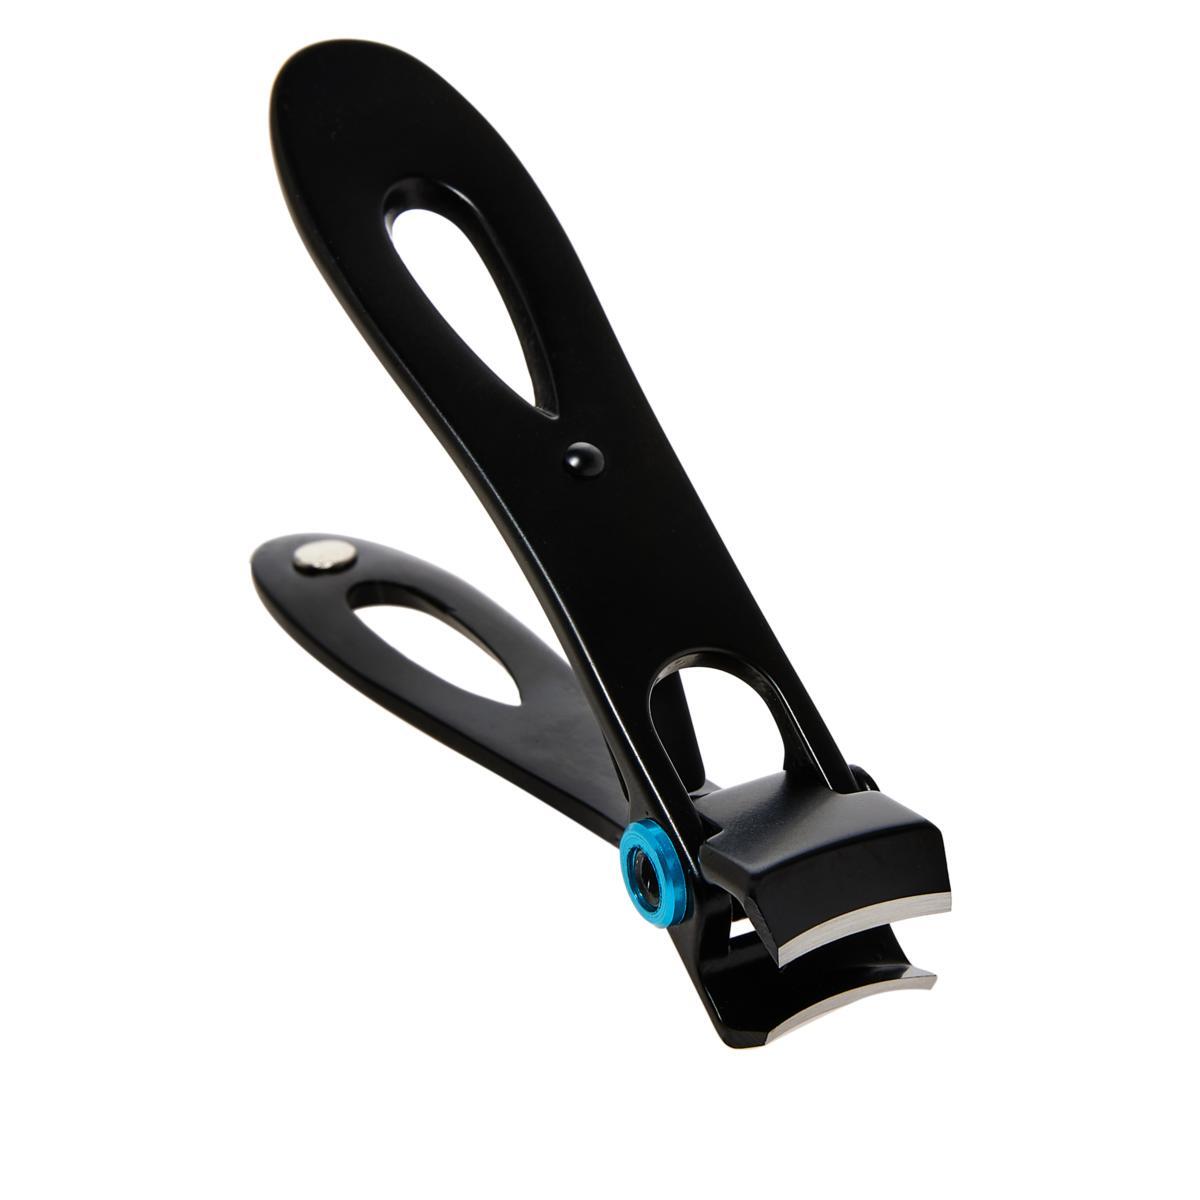 Extra Large Toe Nail Clippers For Thick Nails Heavy-Duty Stainless  Professional.